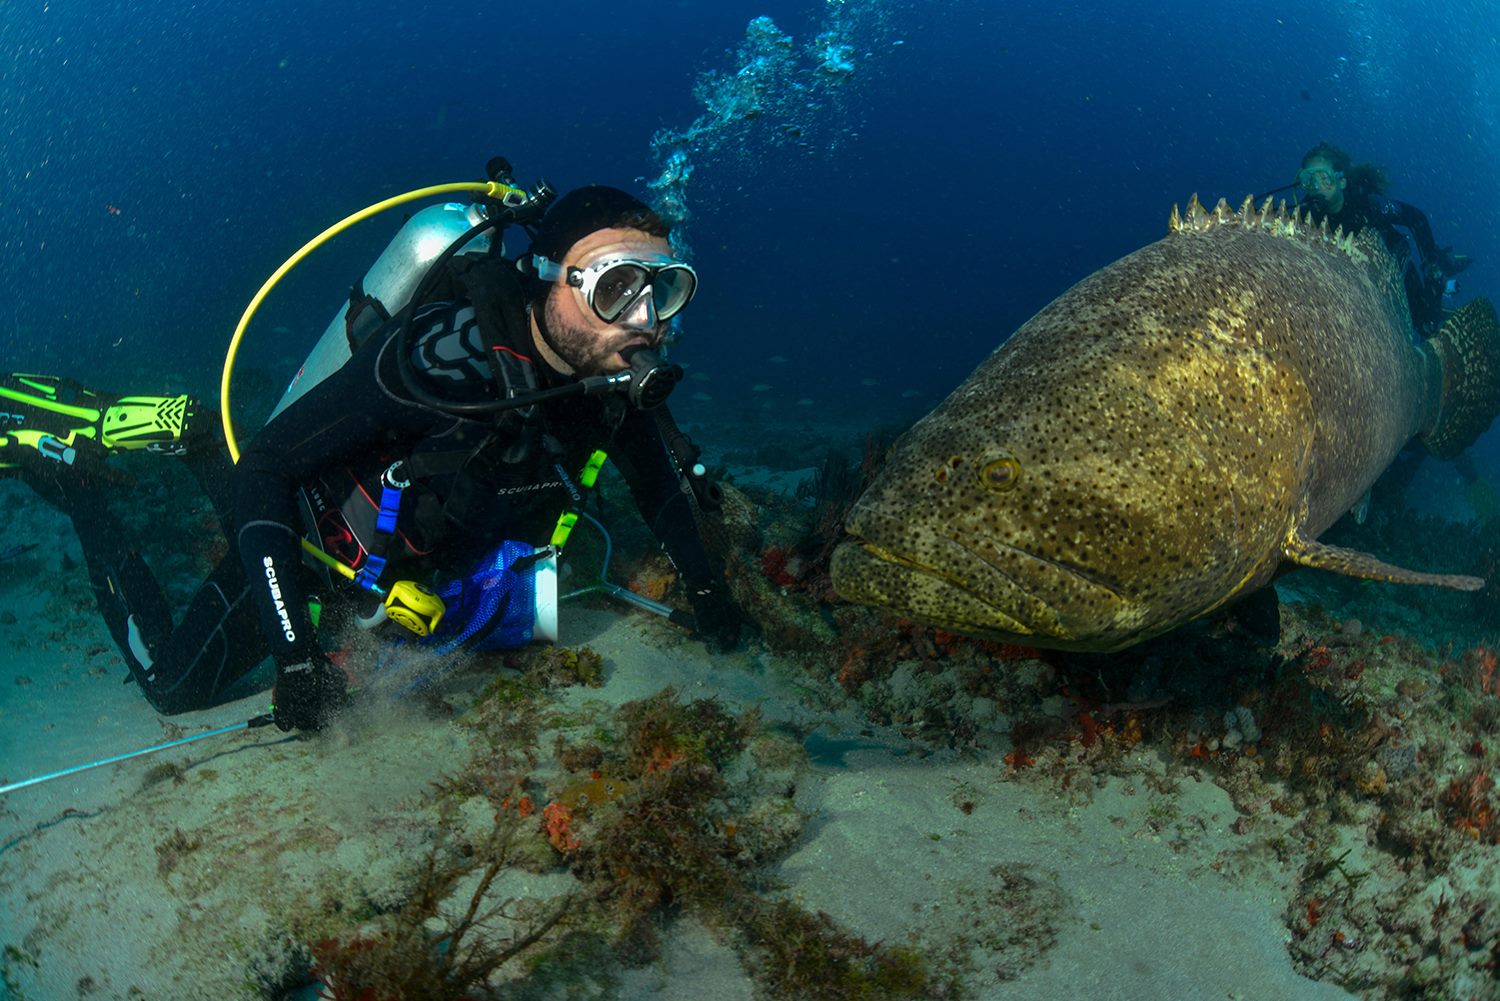 Pawel And Shadow the Grouper